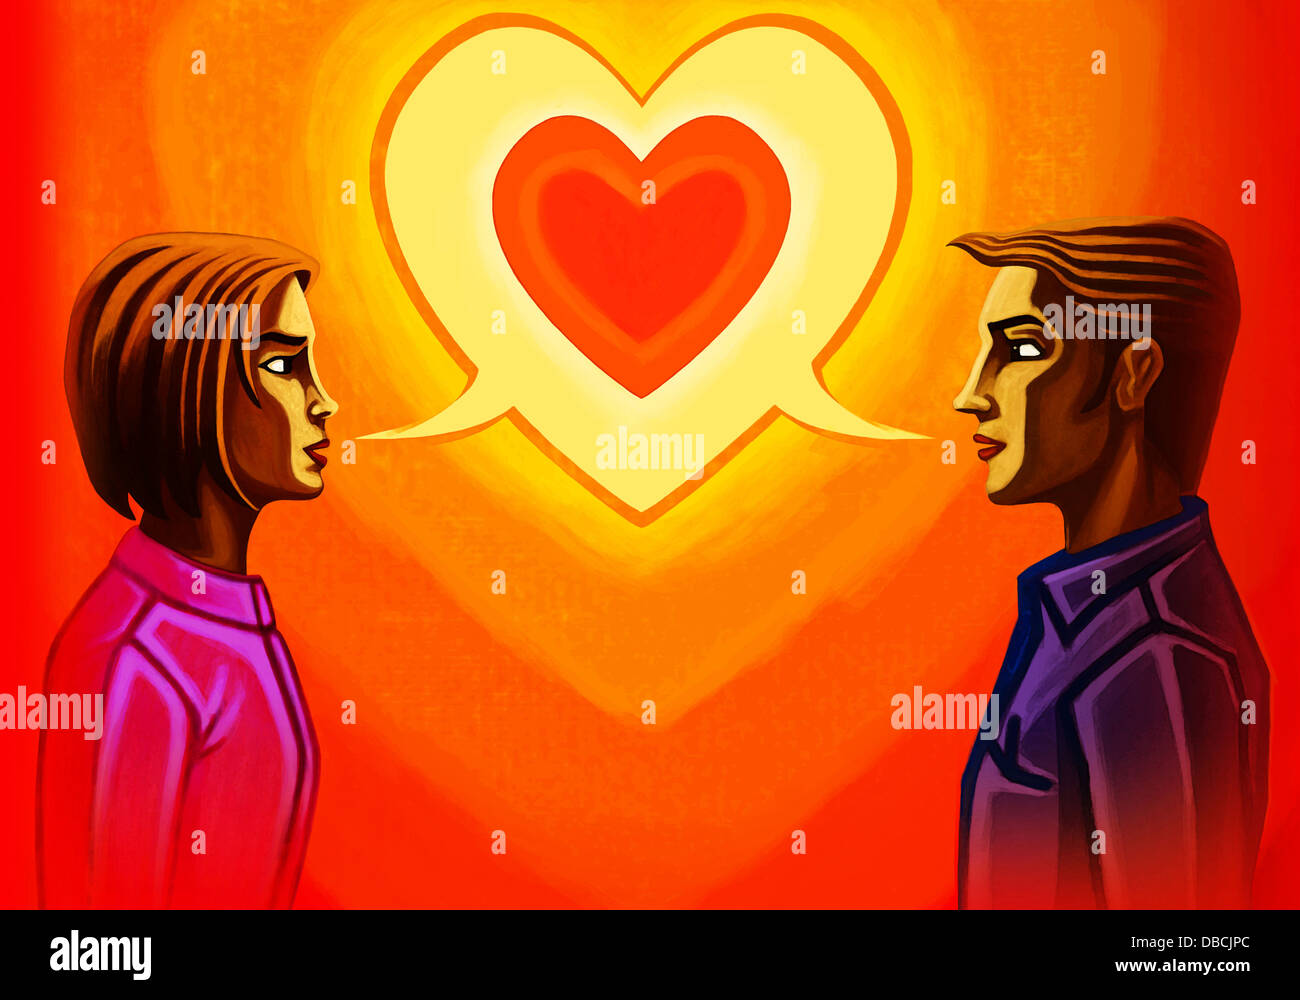 Illustration of couple with heart bubble representing communication Stock Photo